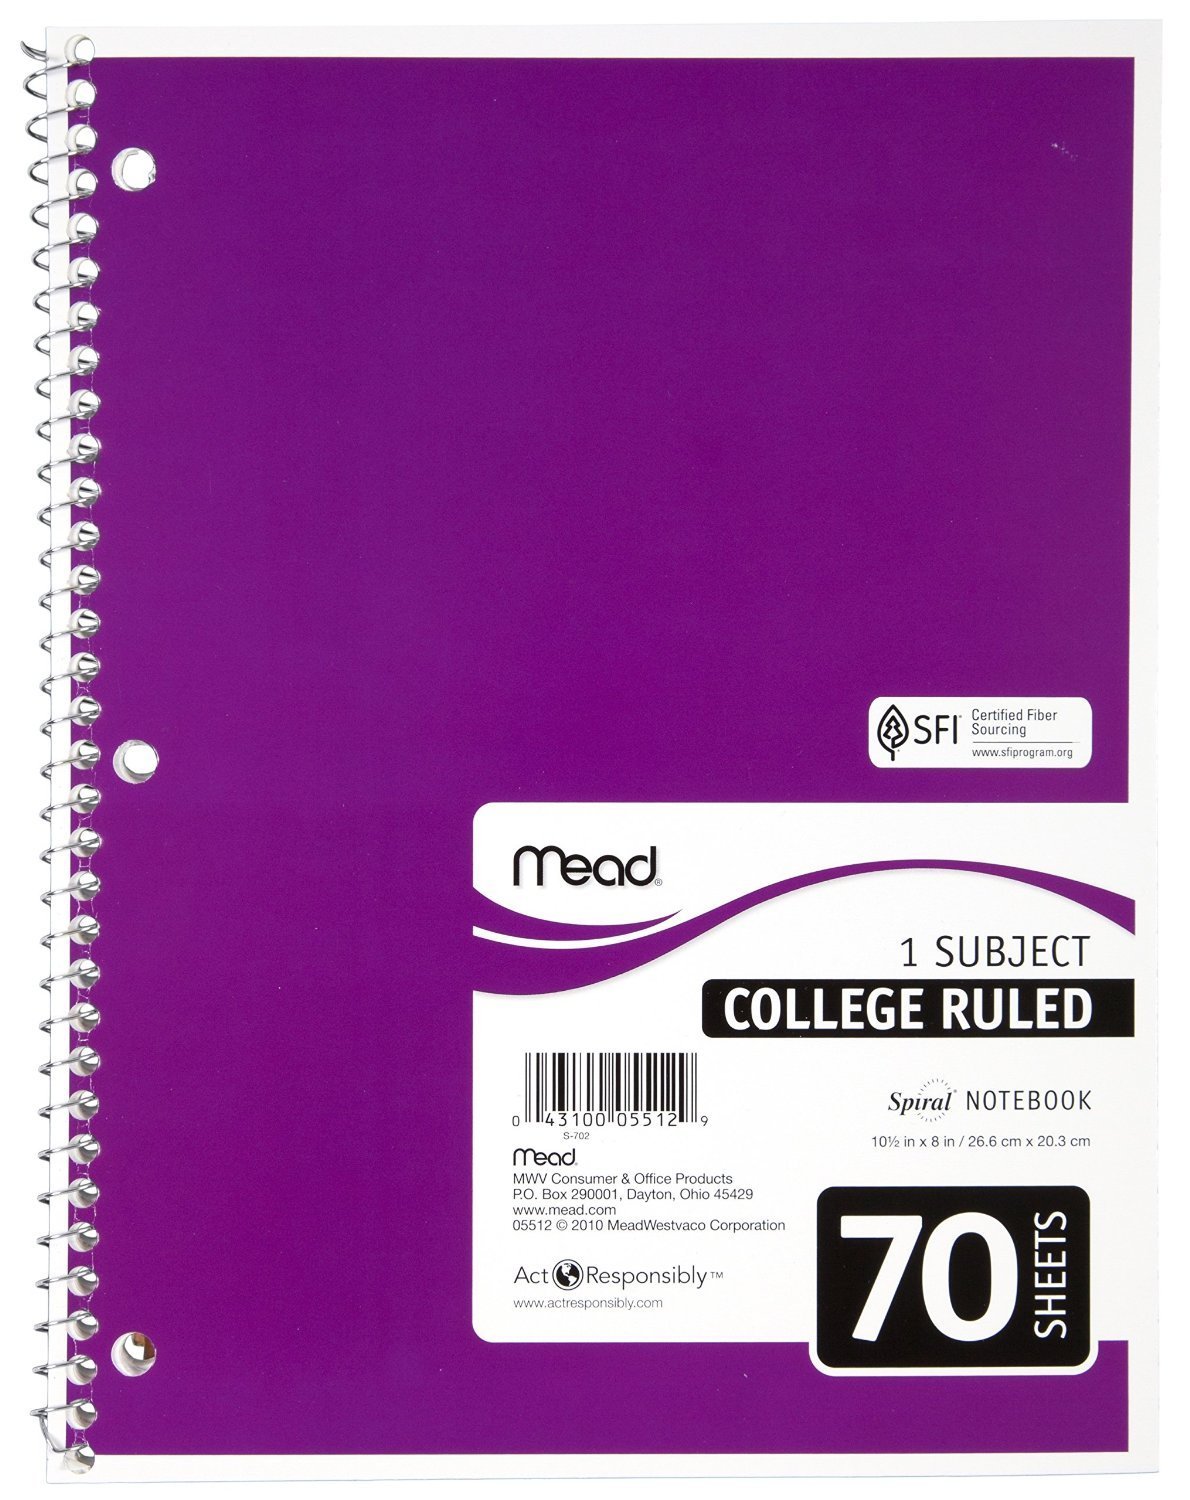 Mead 05512 Spiral Notebook, College Ruled 7.5" x 10.5" 70 Sheets, 1 Subject, 6 Pack, Colors May vary